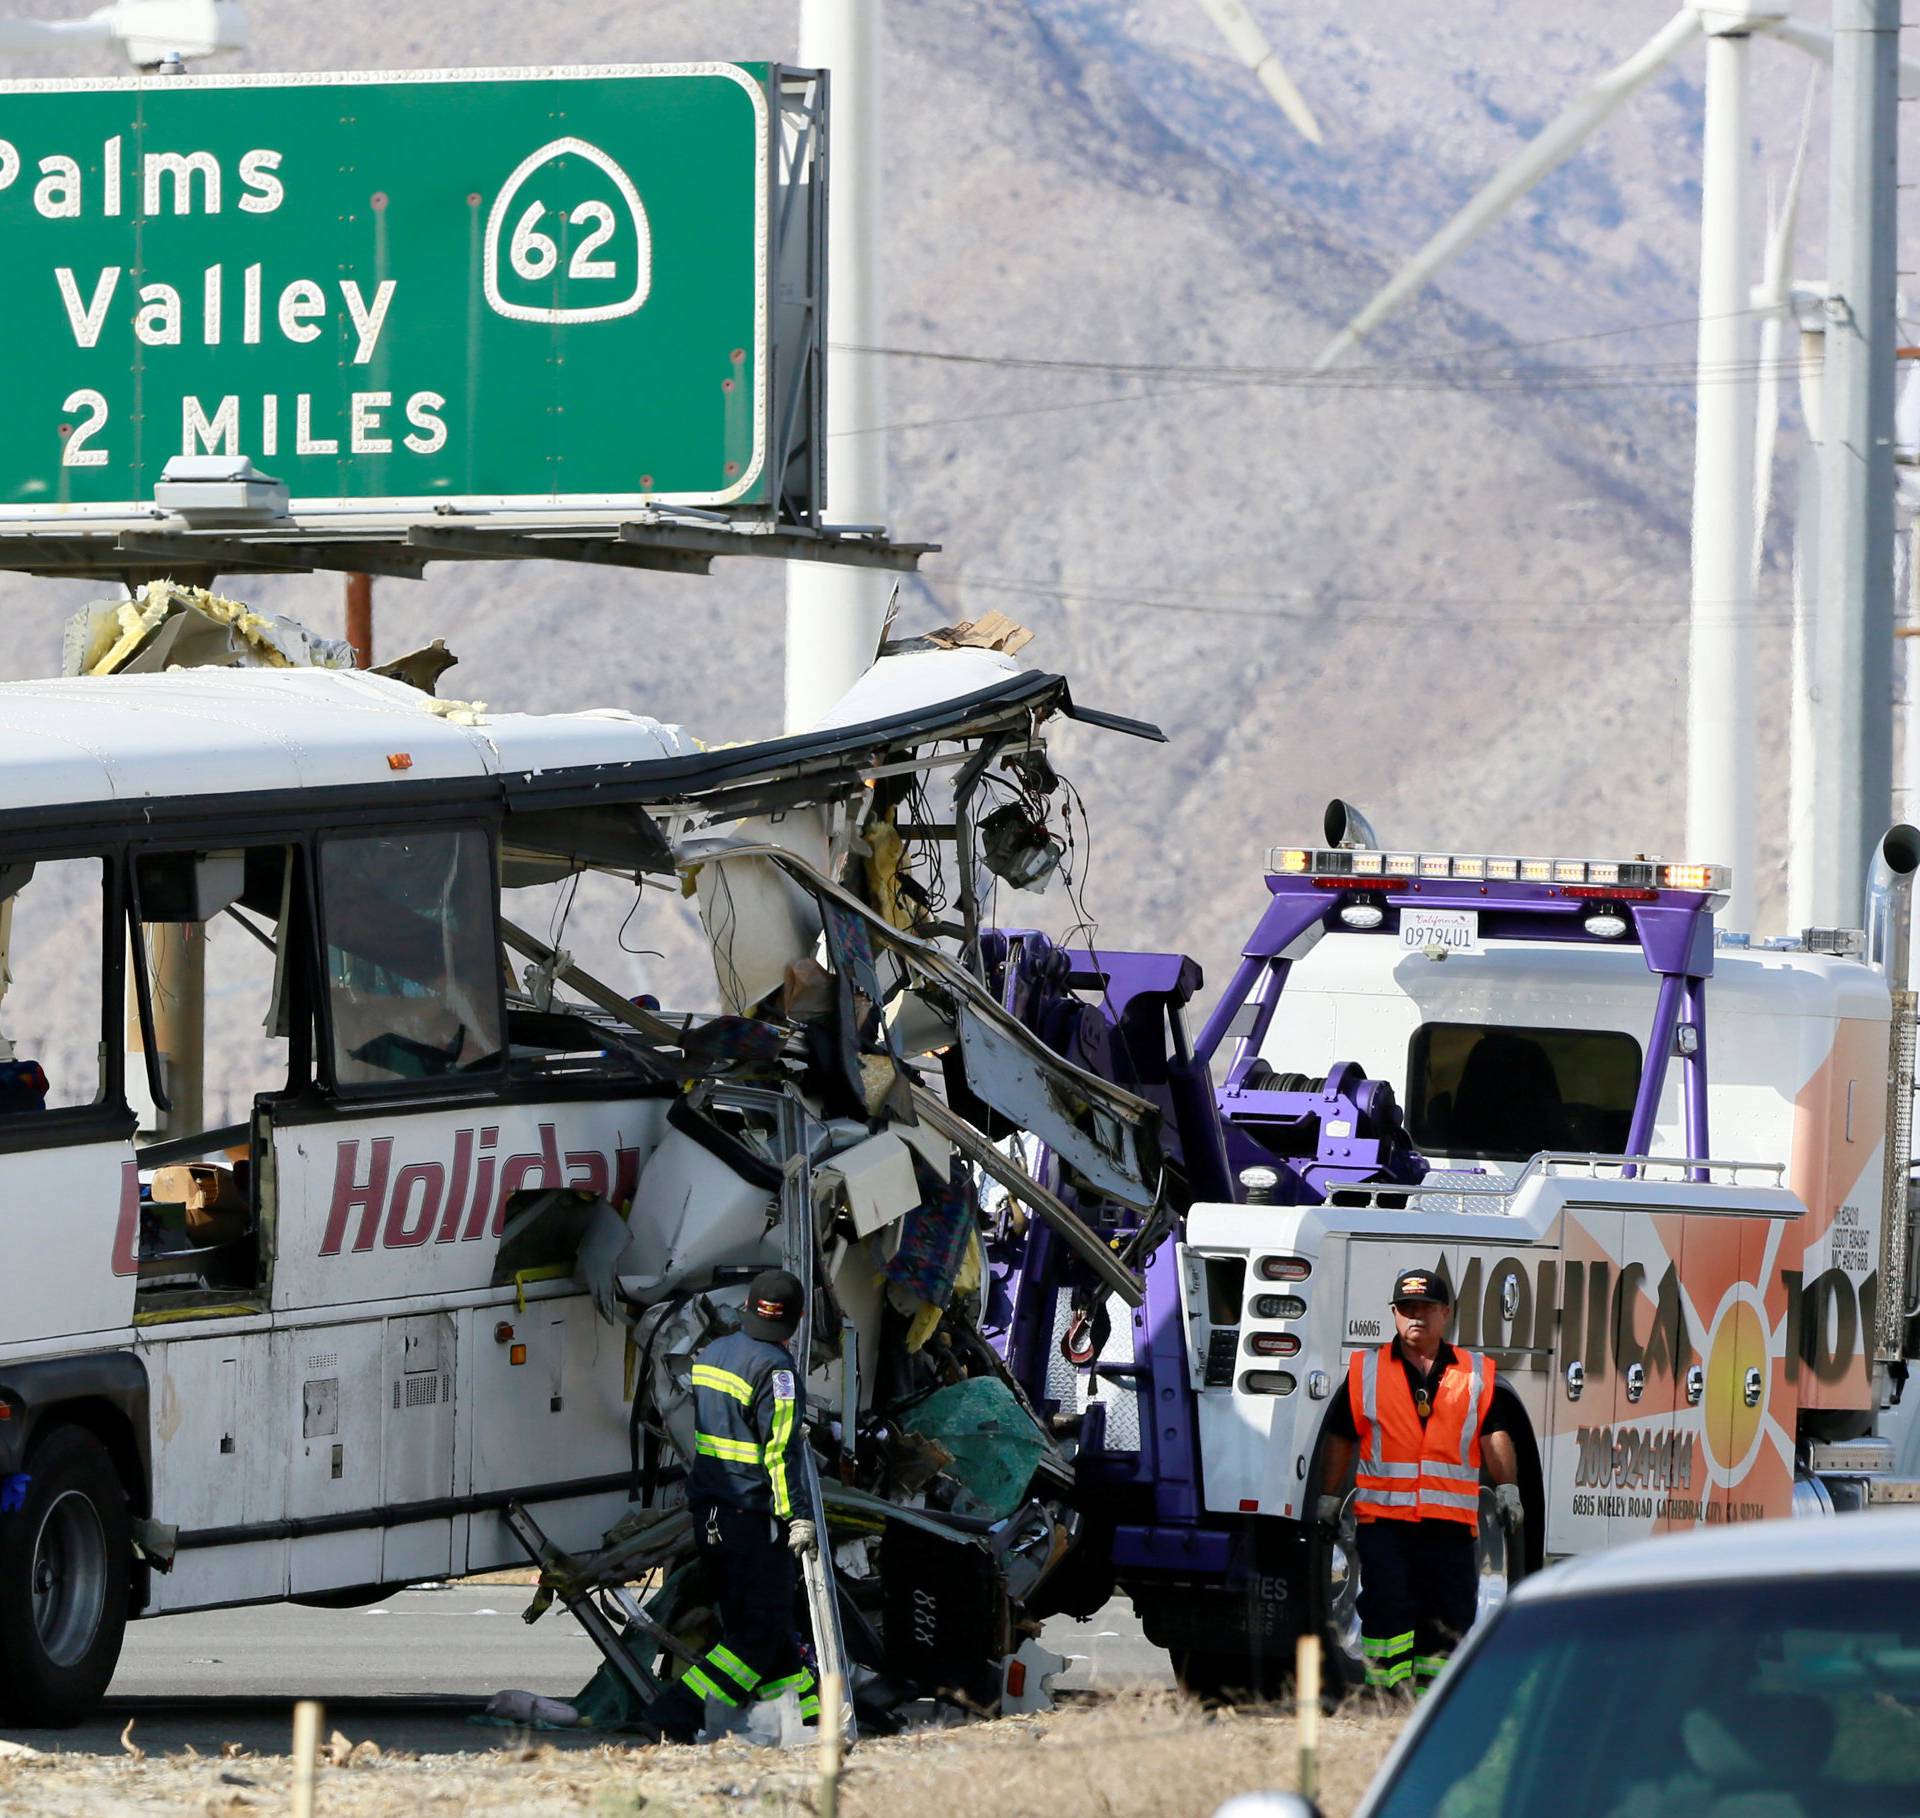 A mangled bus from the Holiday Bus Lines is seen after being towed from the scene of a mass casualty crash on the westbound Interstate 10 freeway near Palm Springs, California